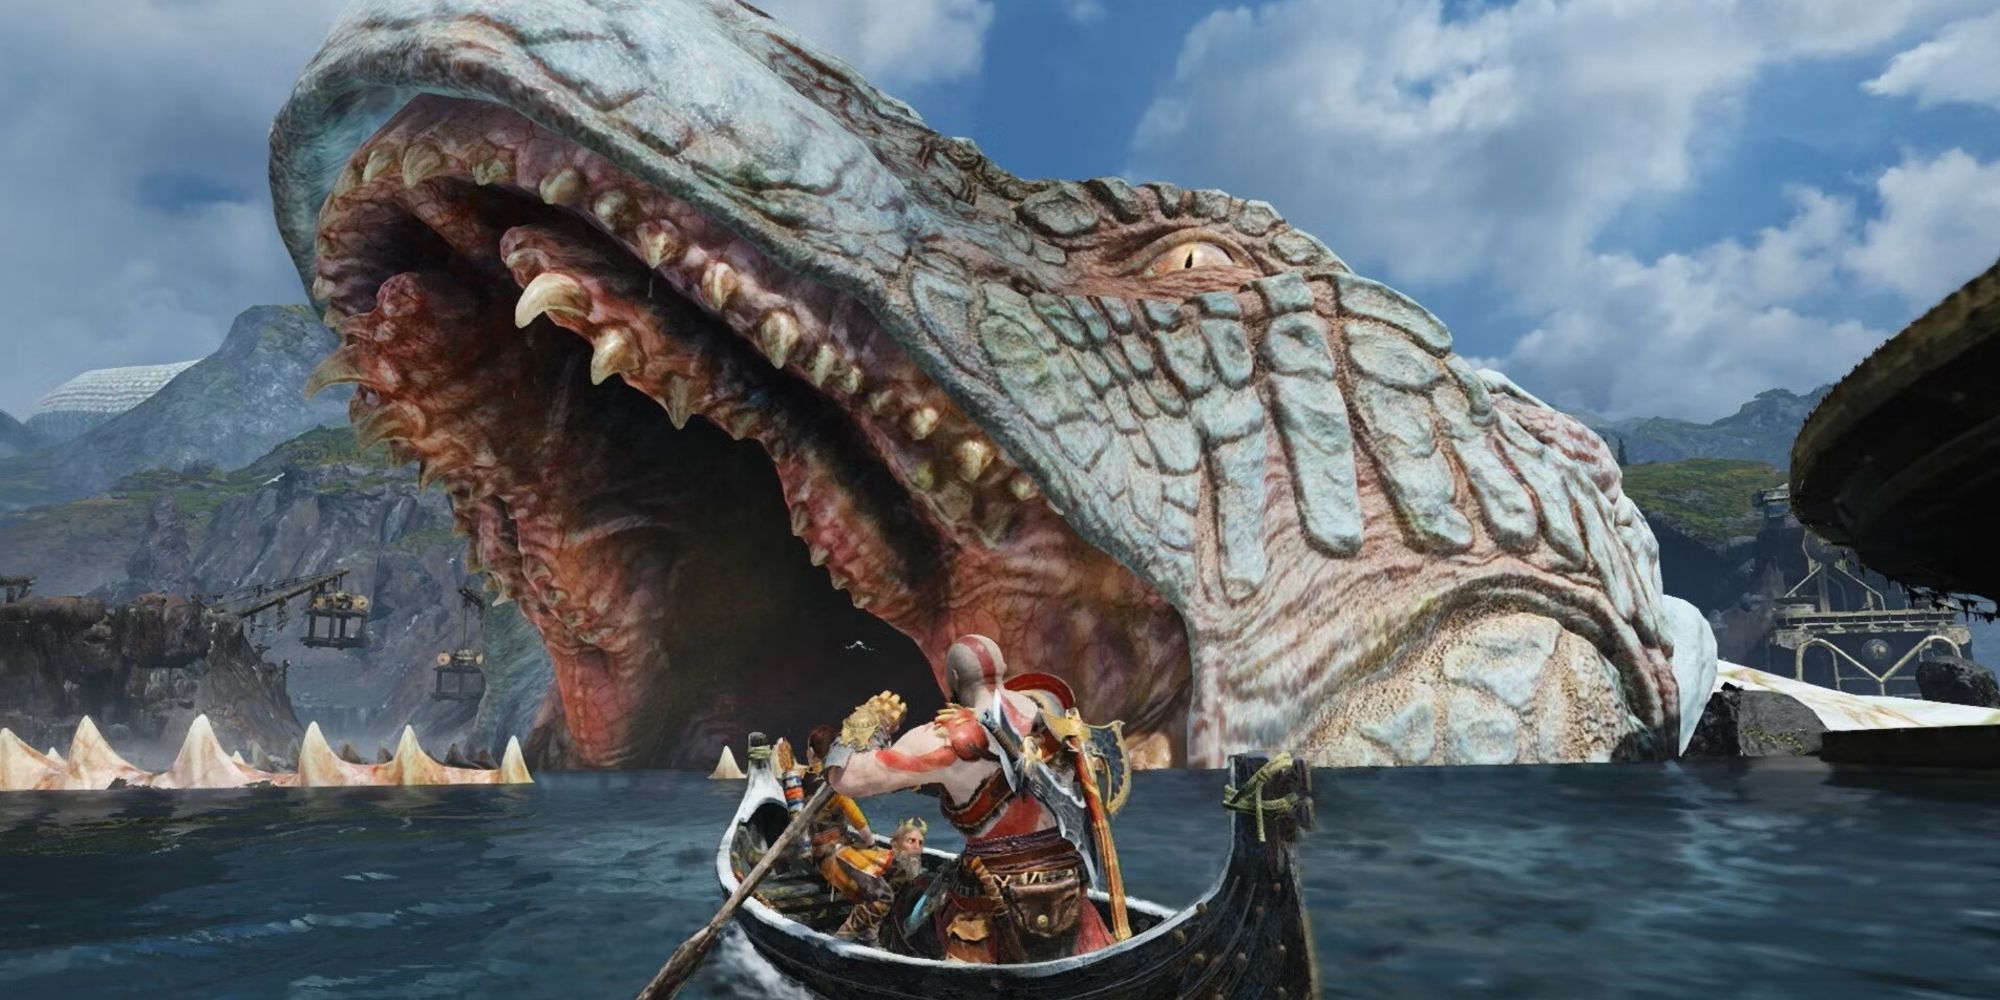 Kratos and Atreus paddling their boat into the open mouth of Jörmungandr in God of War